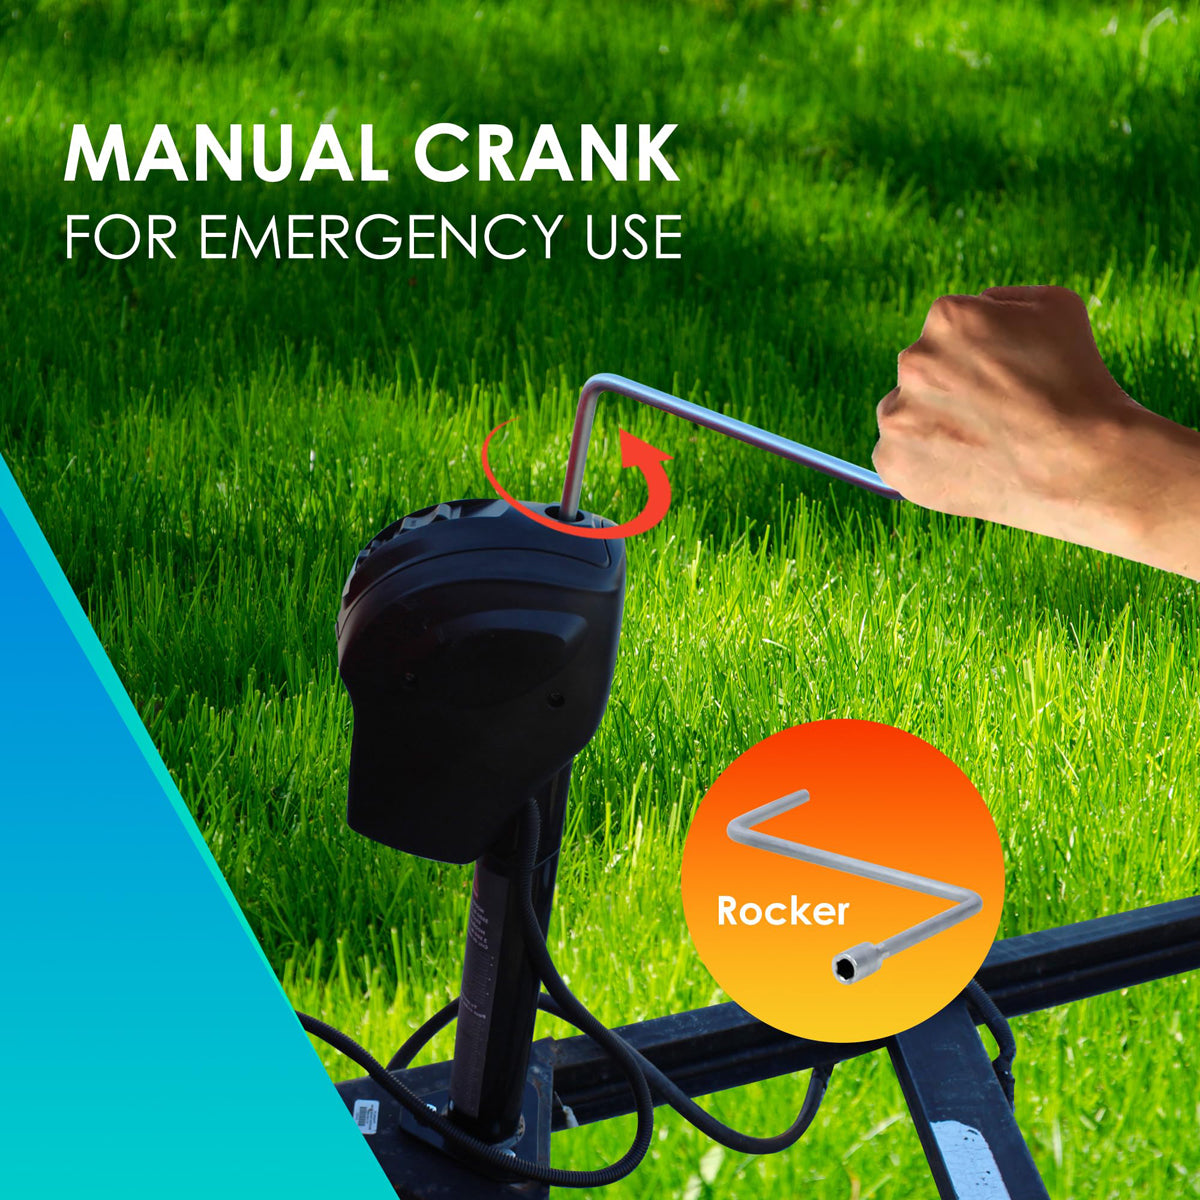 Manual Crank For Emergency Use